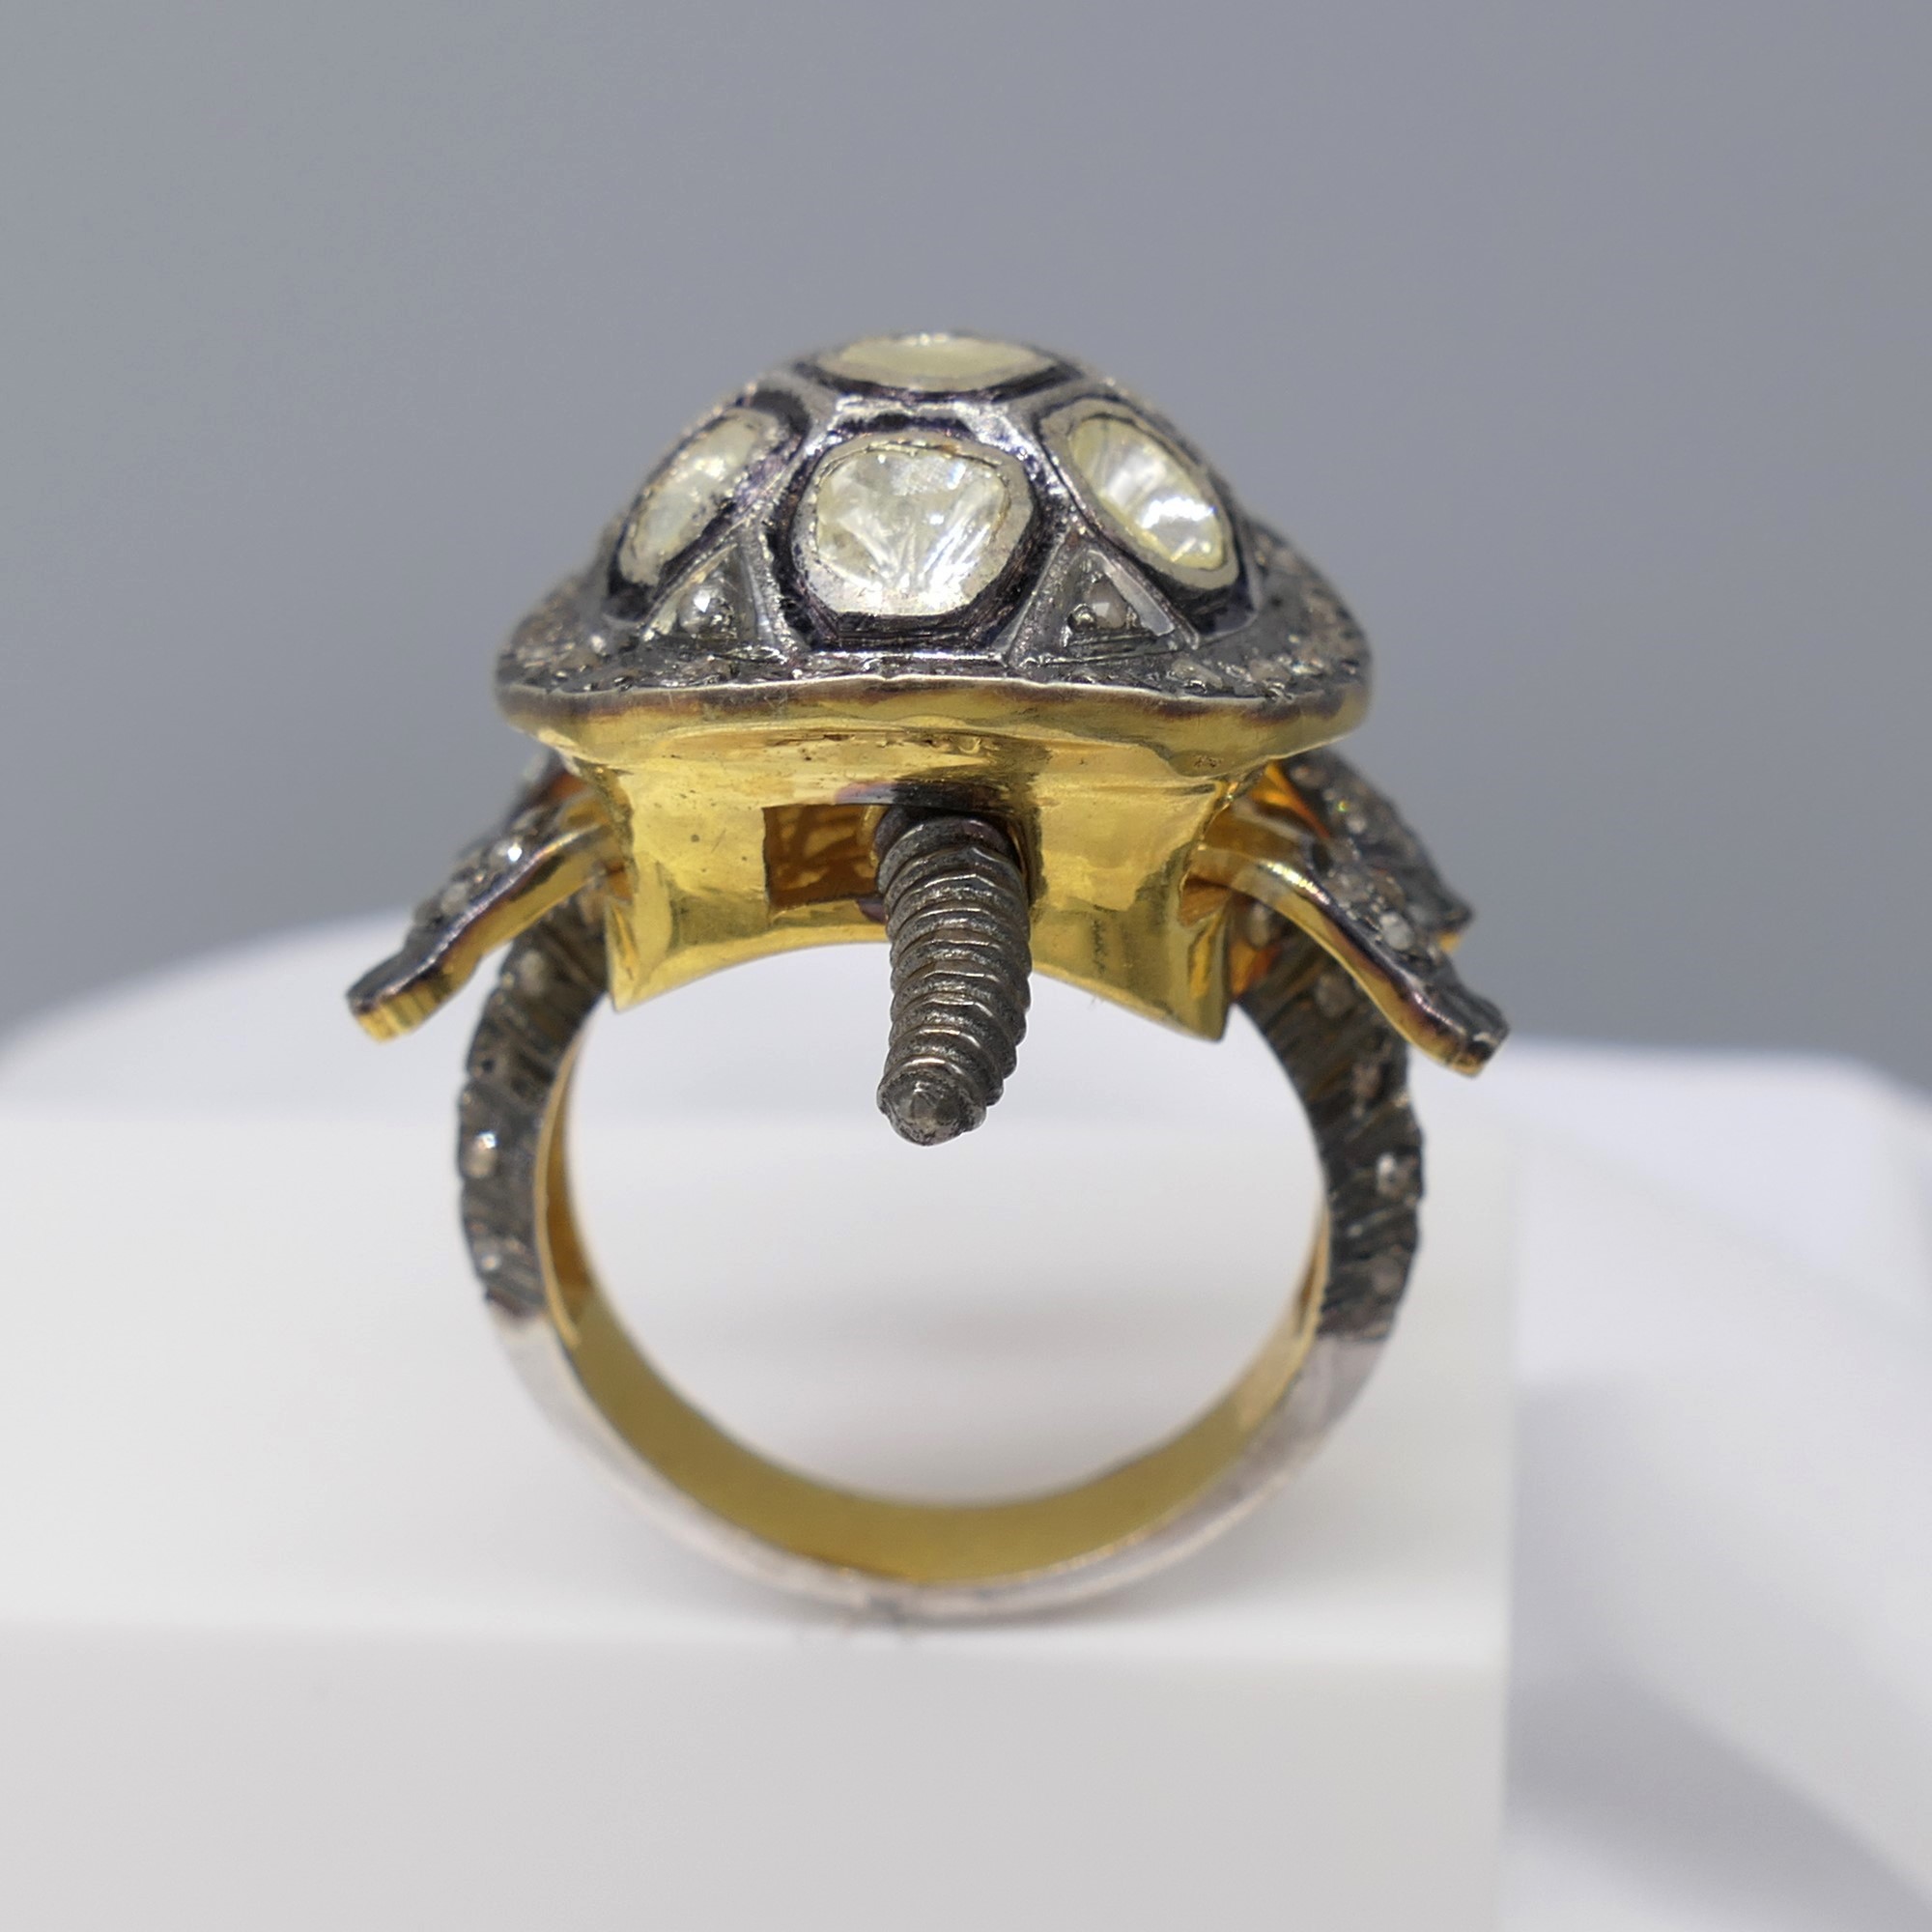 Distinctive 1.30 Carat Diamond and Ruby Tortoise Ring With Movable Body Parts - Image 6 of 6